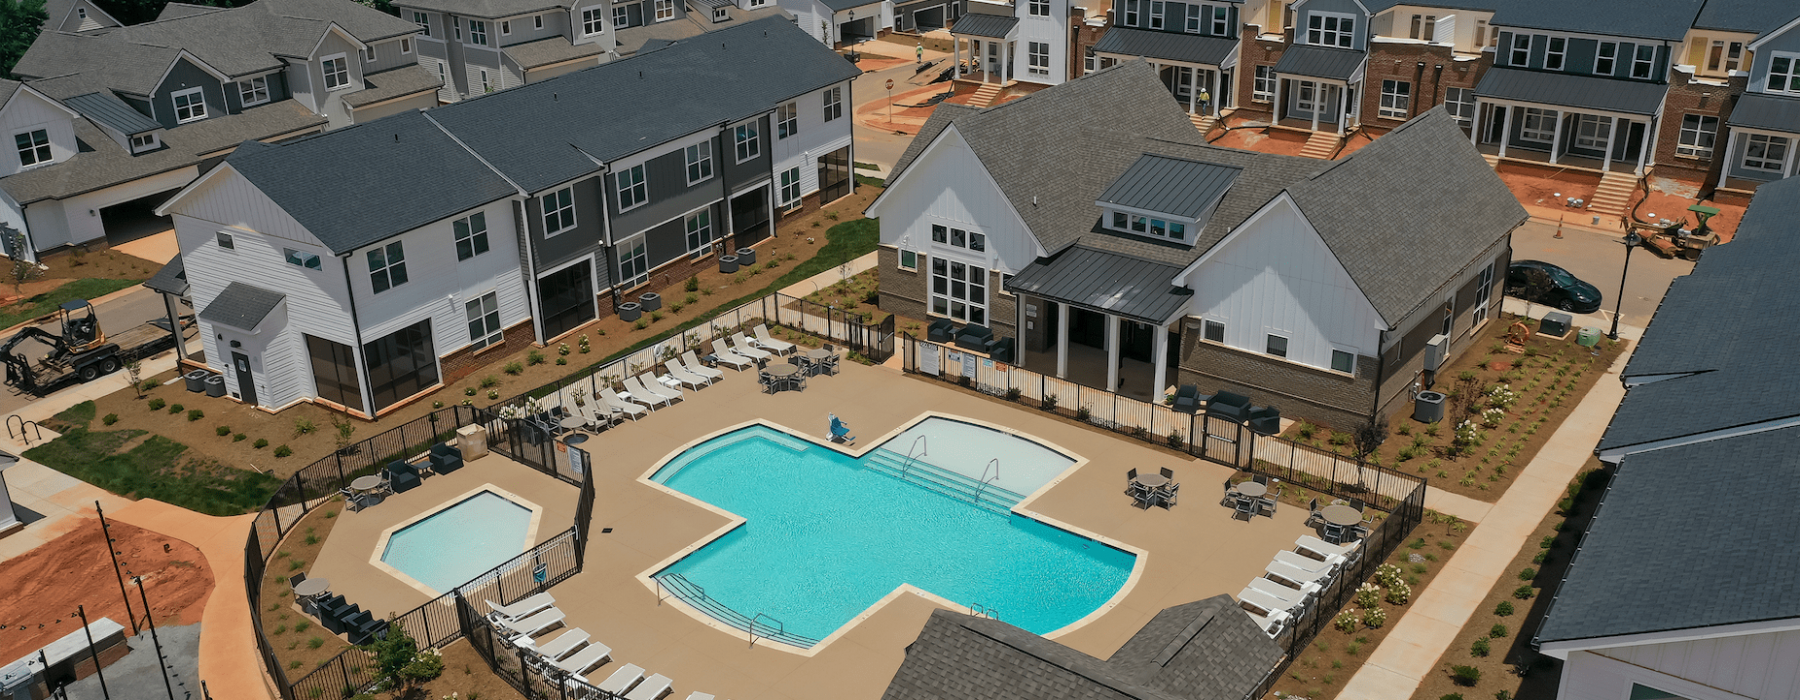 Townhomes at Bridlestone in Pineville, NC